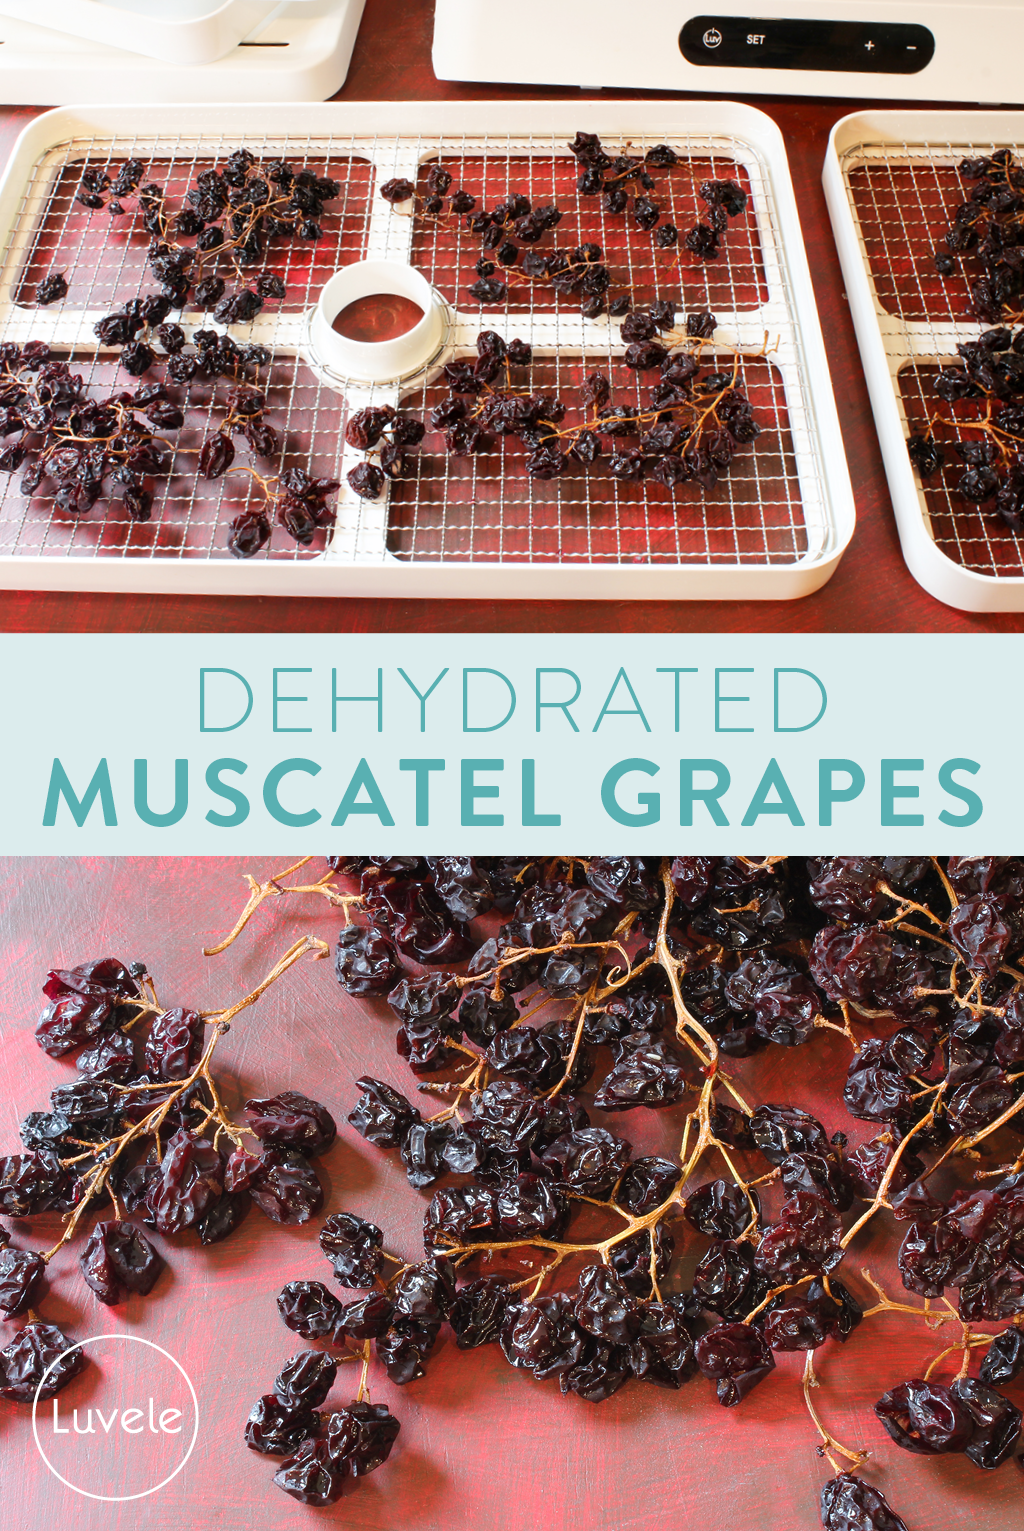 dehydrating muscatel grapes